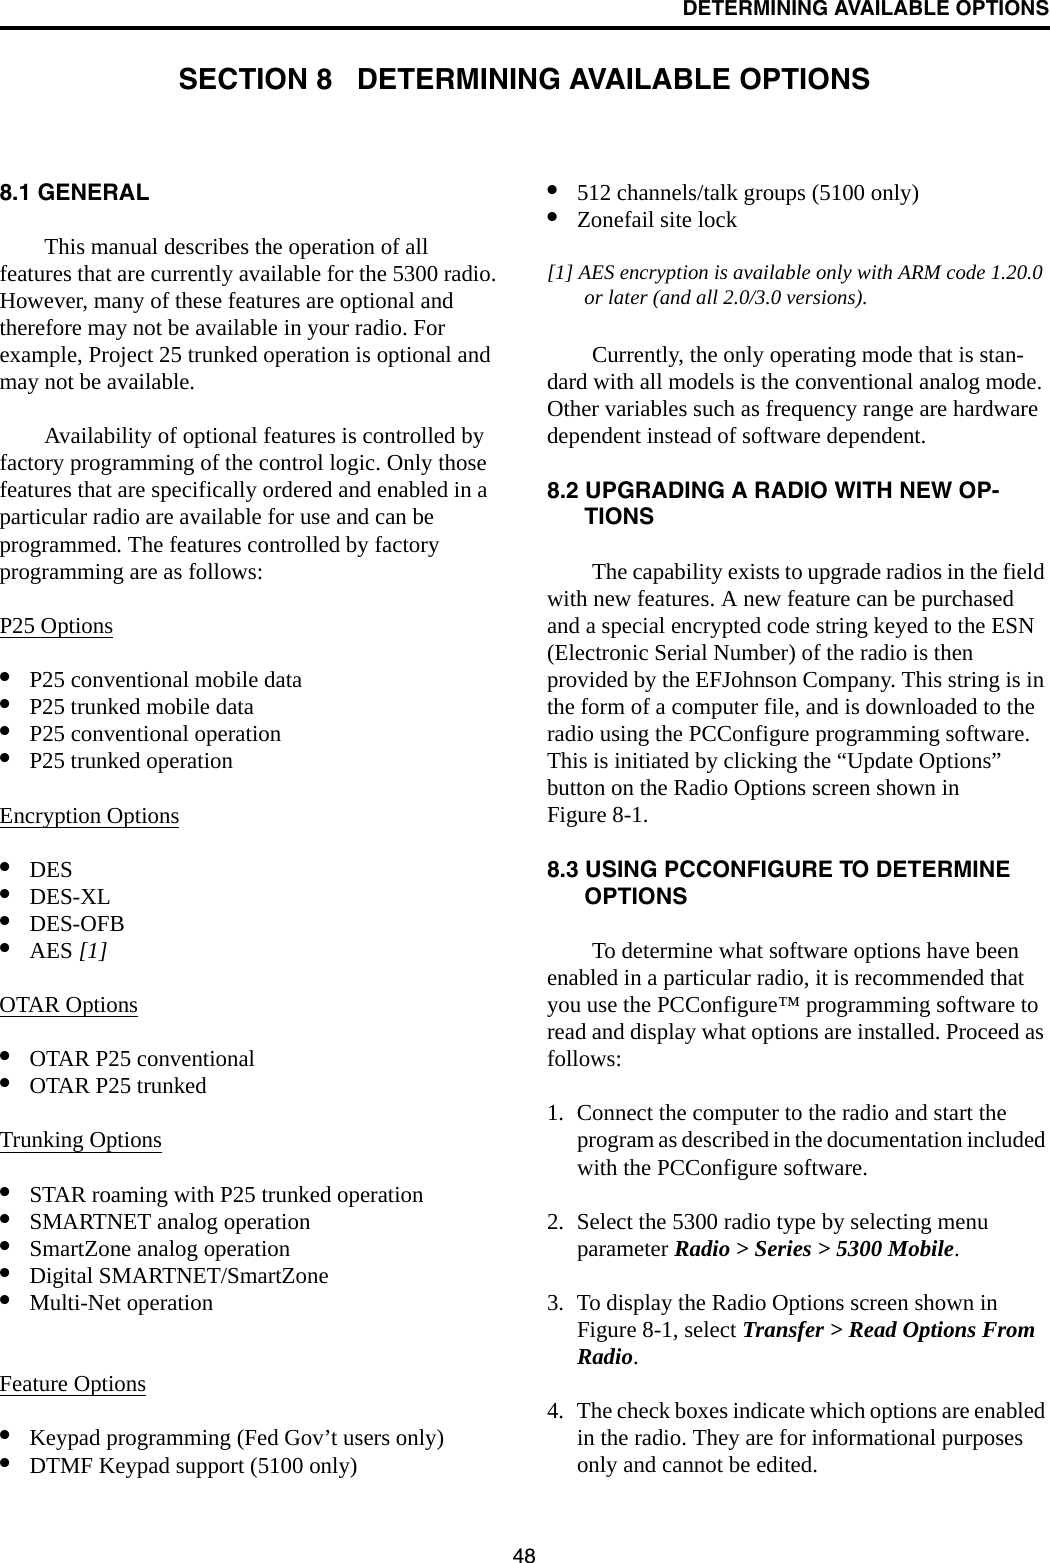 48DETERMINING AVAILABLE OPTIONSSECTION 8   DETERMINING AVAILABLE OPTIONS8.1 GENERALThis manual describes the operation of all features that are currently available for the 5300 radio. However, many of these features are optional and therefore may not be available in your radio. For example, Project 25 trunked operation is optional and may not be available.Availability of optional features is controlled by factory programming of the control logic. Only those features that are specifically ordered and enabled in a particular radio are available for use and can be programmed. The features controlled by factory programming are as follows:P25 Options•P25 conventional mobile data•P25 trunked mobile data•P25 conventional operation•P25 trunked operationEncryption Options•DES •DES-XL •DES-OFB•AES [1]OTAR Options•OTAR P25 conventional•OTAR P25 trunkedTrunking Options•STAR roaming with P25 trunked operation•SMARTNET analog operation•SmartZone analog operation•Digital SMARTNET/SmartZone•Multi-Net operationFeature Options•Keypad programming (Fed Gov’t users only)•DTMF Keypad support (5100 only)•512 channels/talk groups (5100 only)•Zonefail site lock[1] AES encryption is available only with ARM code 1.20.0 or later (and all 2.0/3.0 versions). Currently, the only operating mode that is stan-dard with all models is the conventional analog mode. Other variables such as frequency range are hardware dependent instead of software dependent.8.2 UPGRADING A RADIO WITH NEW OP-TIONSThe capability exists to upgrade radios in the field with new features. A new feature can be purchased and a special encrypted code string keyed to the ESN (Electronic Serial Number) of the radio is then provided by the EFJohnson Company. This string is in the form of a computer file, and is downloaded to the radio using the PCConfigure programming software. This is initiated by clicking the “Update Options” button on the Radio Options screen shown in Figure 8-1.8.3 USING PCCONFIGURE TO DETERMINE OPTIONSTo determine what software options have been enabled in a particular radio, it is recommended that you use the PCConfigure™ programming software to read and display what options are installed. Proceed as follows:1. Connect the computer to the radio and start the program as described in the documentation included with the PCConfigure software.2. Select the 5300 radio type by selecting menu parameter Radio &gt; Series &gt; 5300 Mobile.3. To display the Radio Options screen shown in Figure 8-1, select Transfer &gt; Read Options From Radio.4. The check boxes indicate which options are enabled in the radio. They are for informational purposes only and cannot be edited.